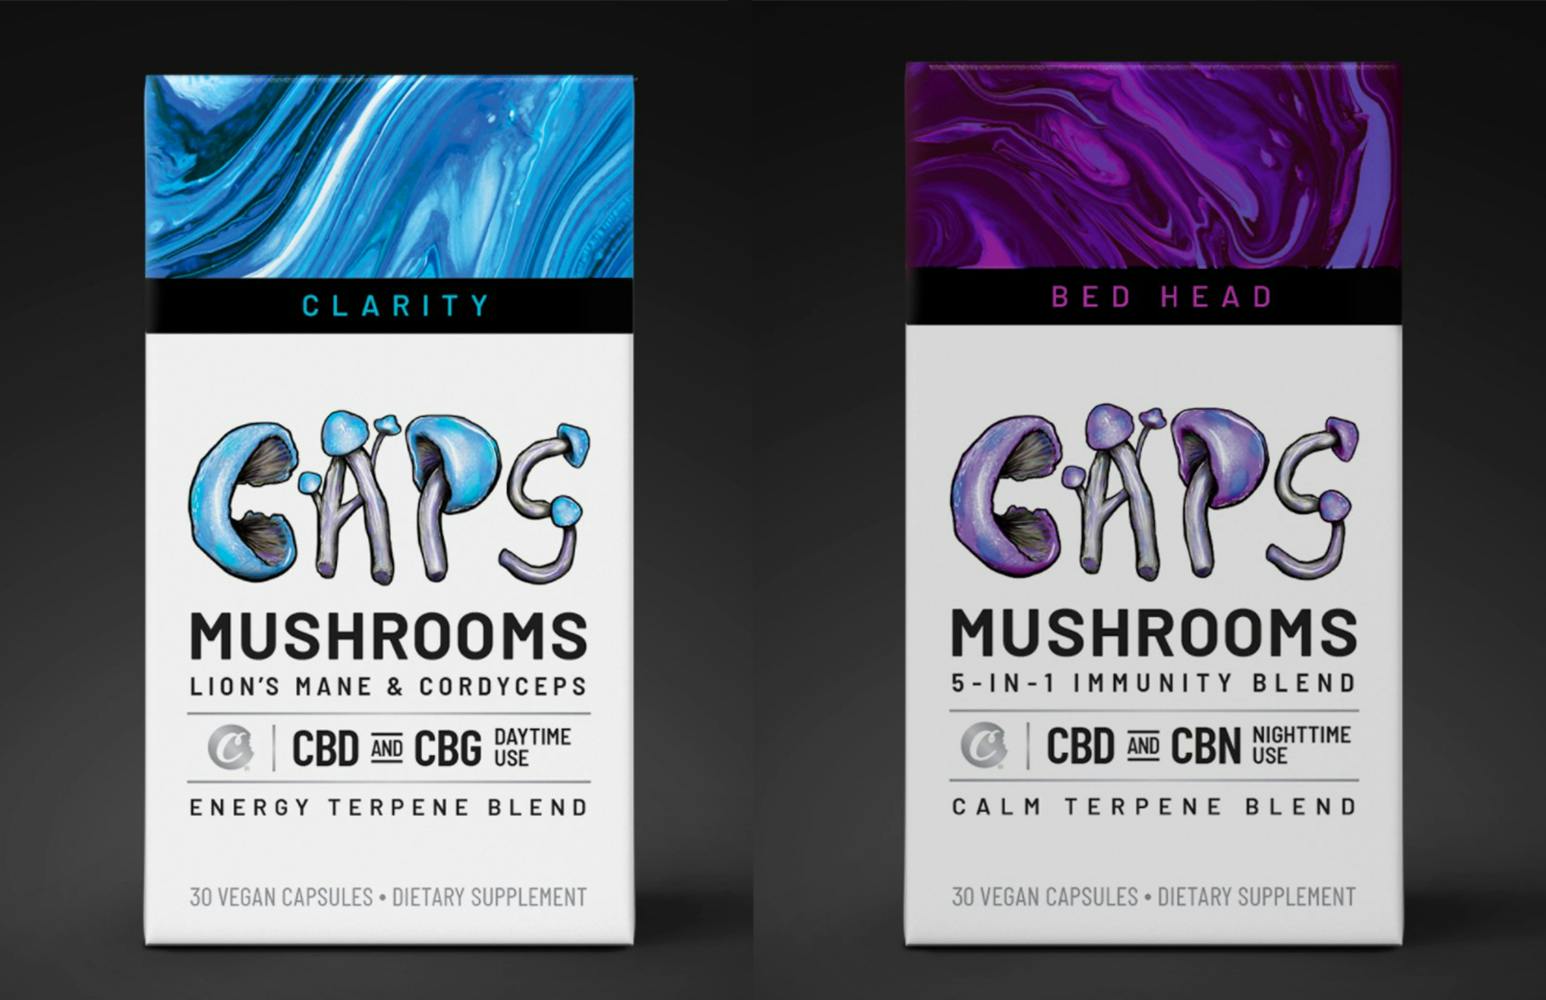 Clarity Caps and Bed Head Caps packaging look similar to cigarette boxes and use mushroom illustrations as font.